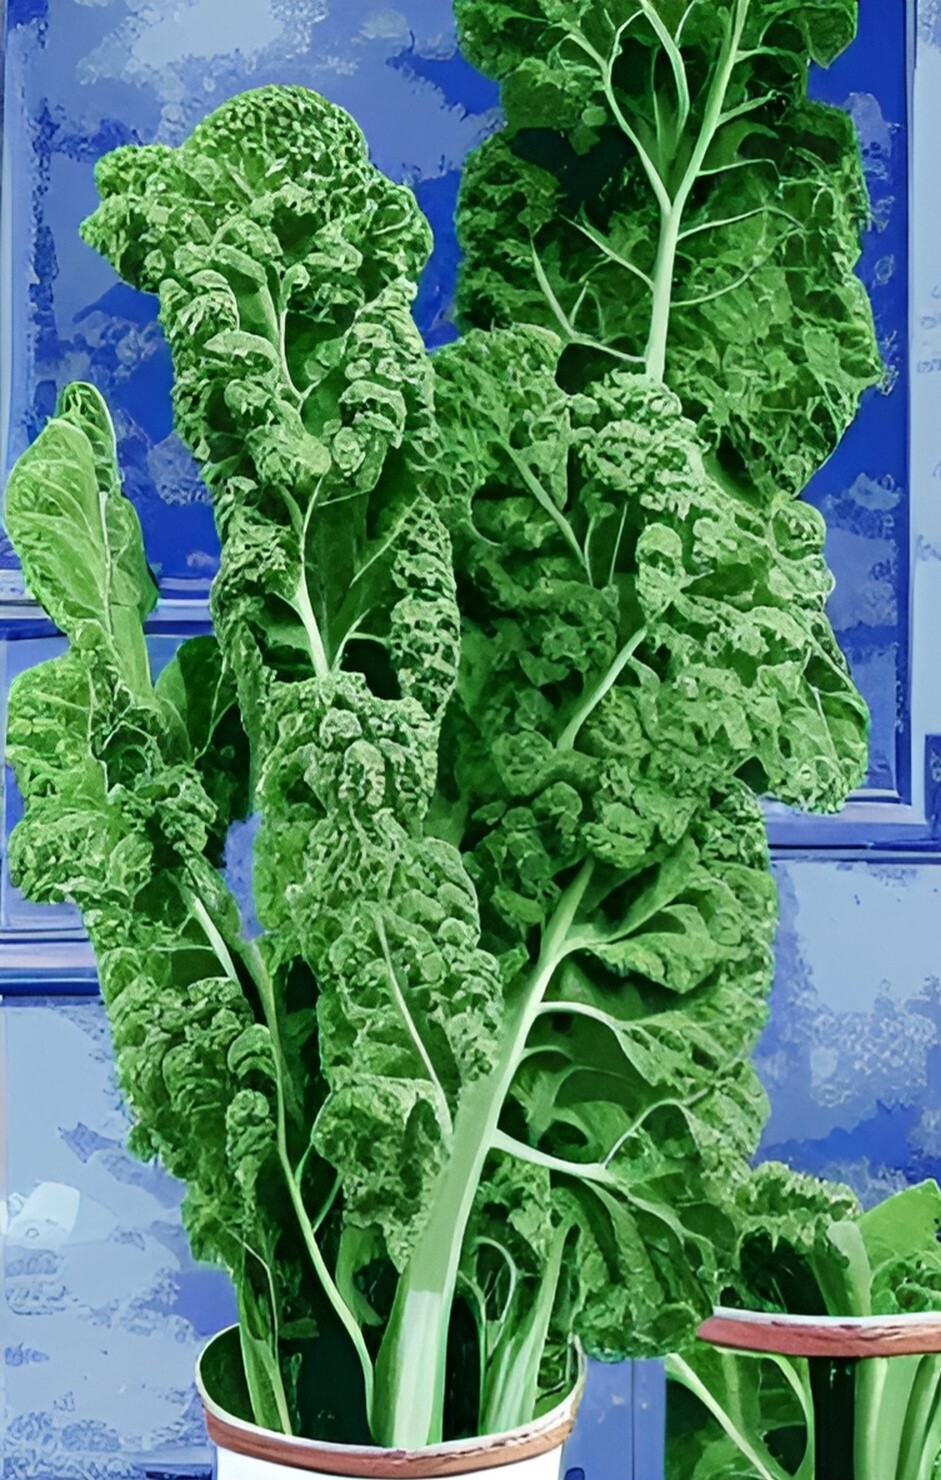 Tips for Growing Kale